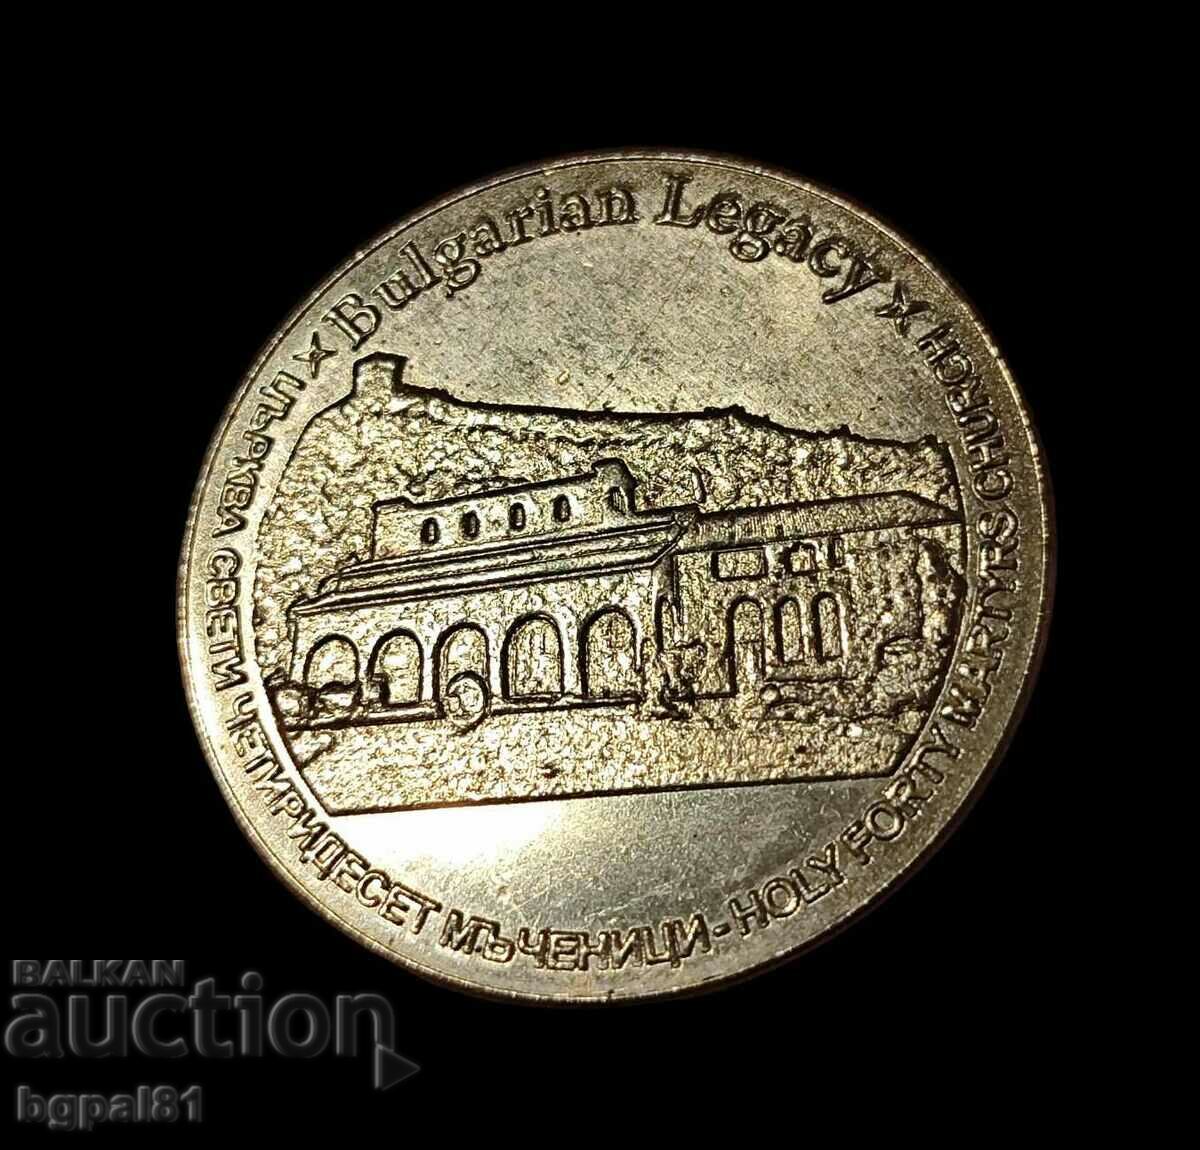 Church of St. 40 martyrs - "Bulgarian legacy" medal issue